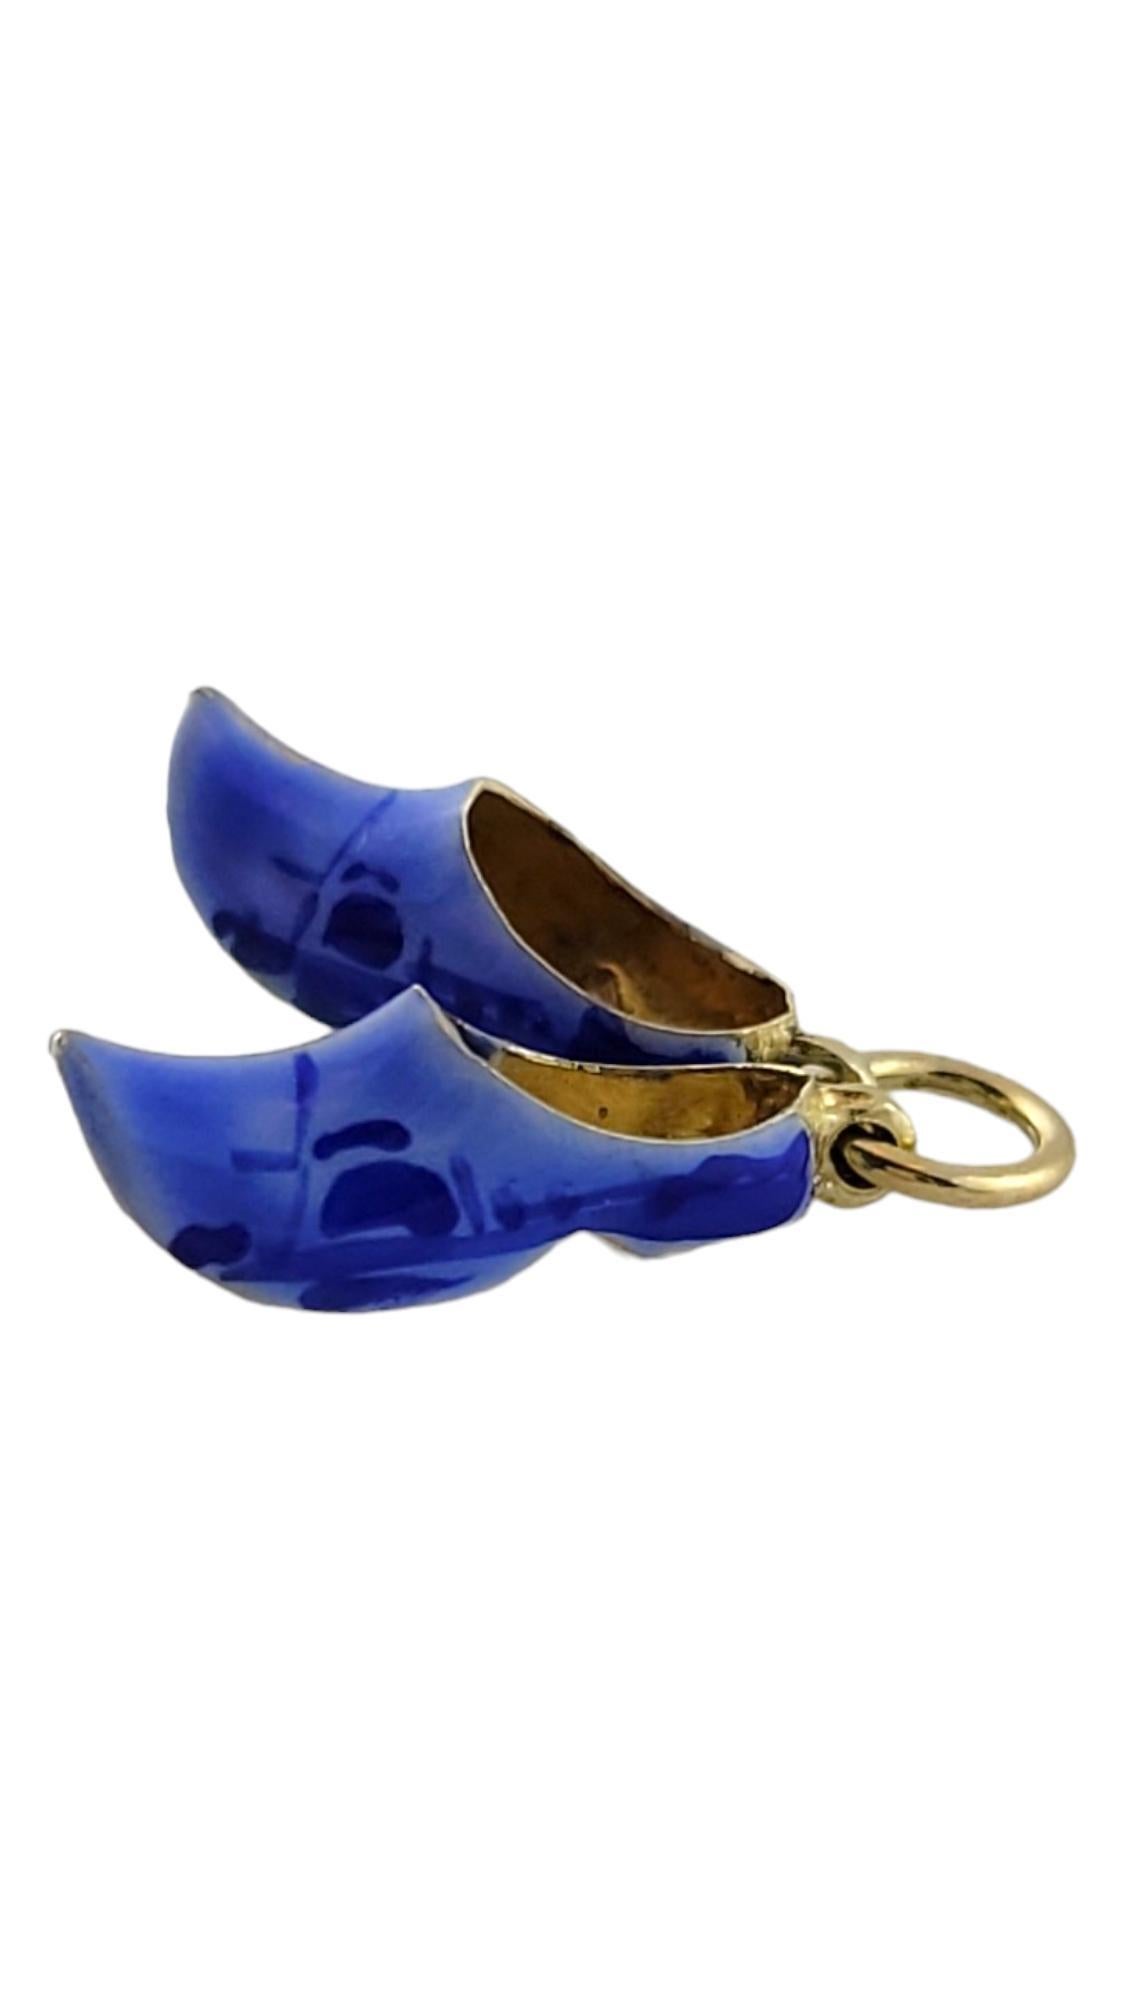 Vintage 14K Yellow Gold Enamel Dutch Clog Shoe Charm

This adorable Dutch clog charm is decorated with gorgeous blue enamel!

Size of each shoe: 12.88mm X 4.75mm X 5.14mm

Weight: 0.5 dwt/ 0.8 g

Hallmark: 585

Very good condition, professionally